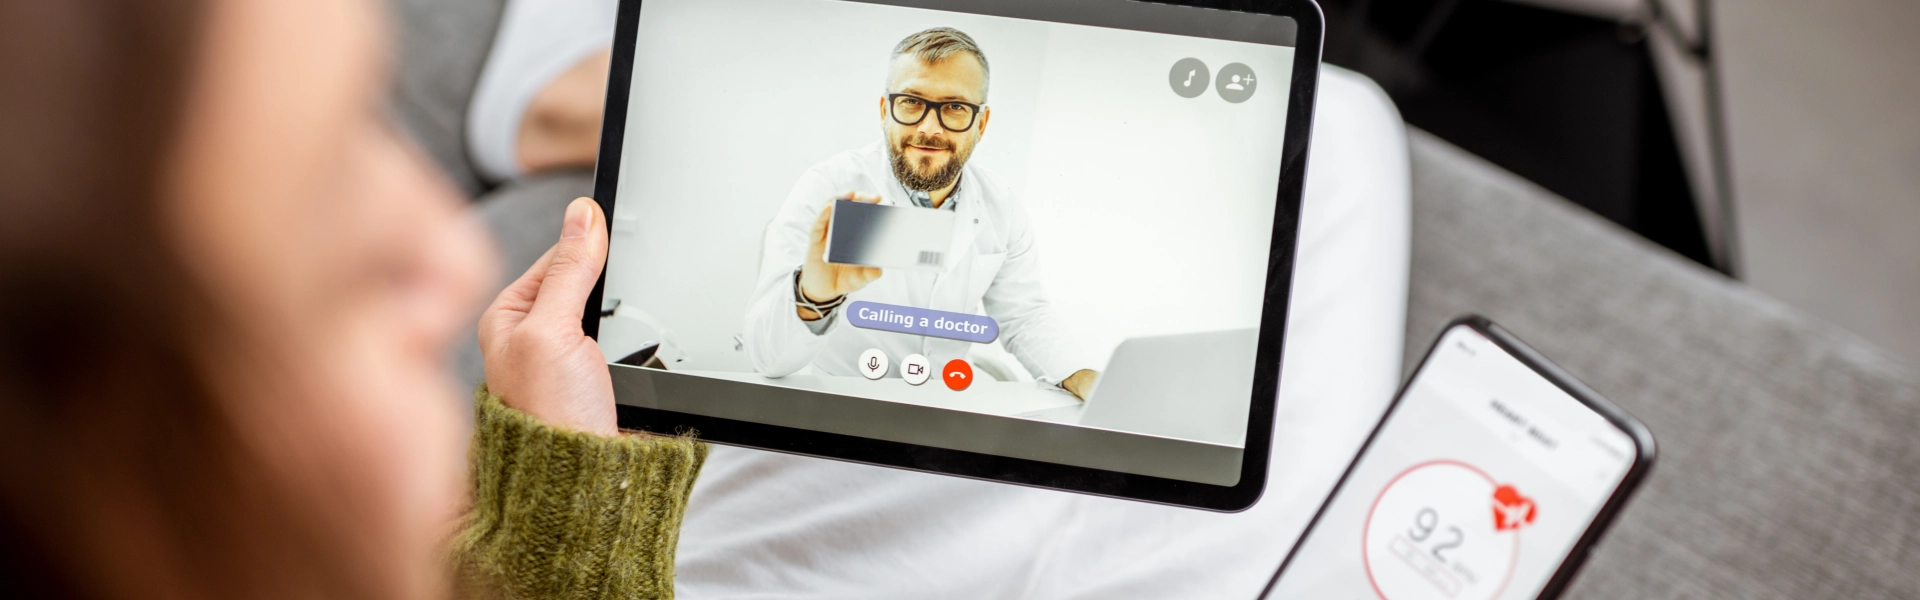 male doctor talking to a female patient through video call